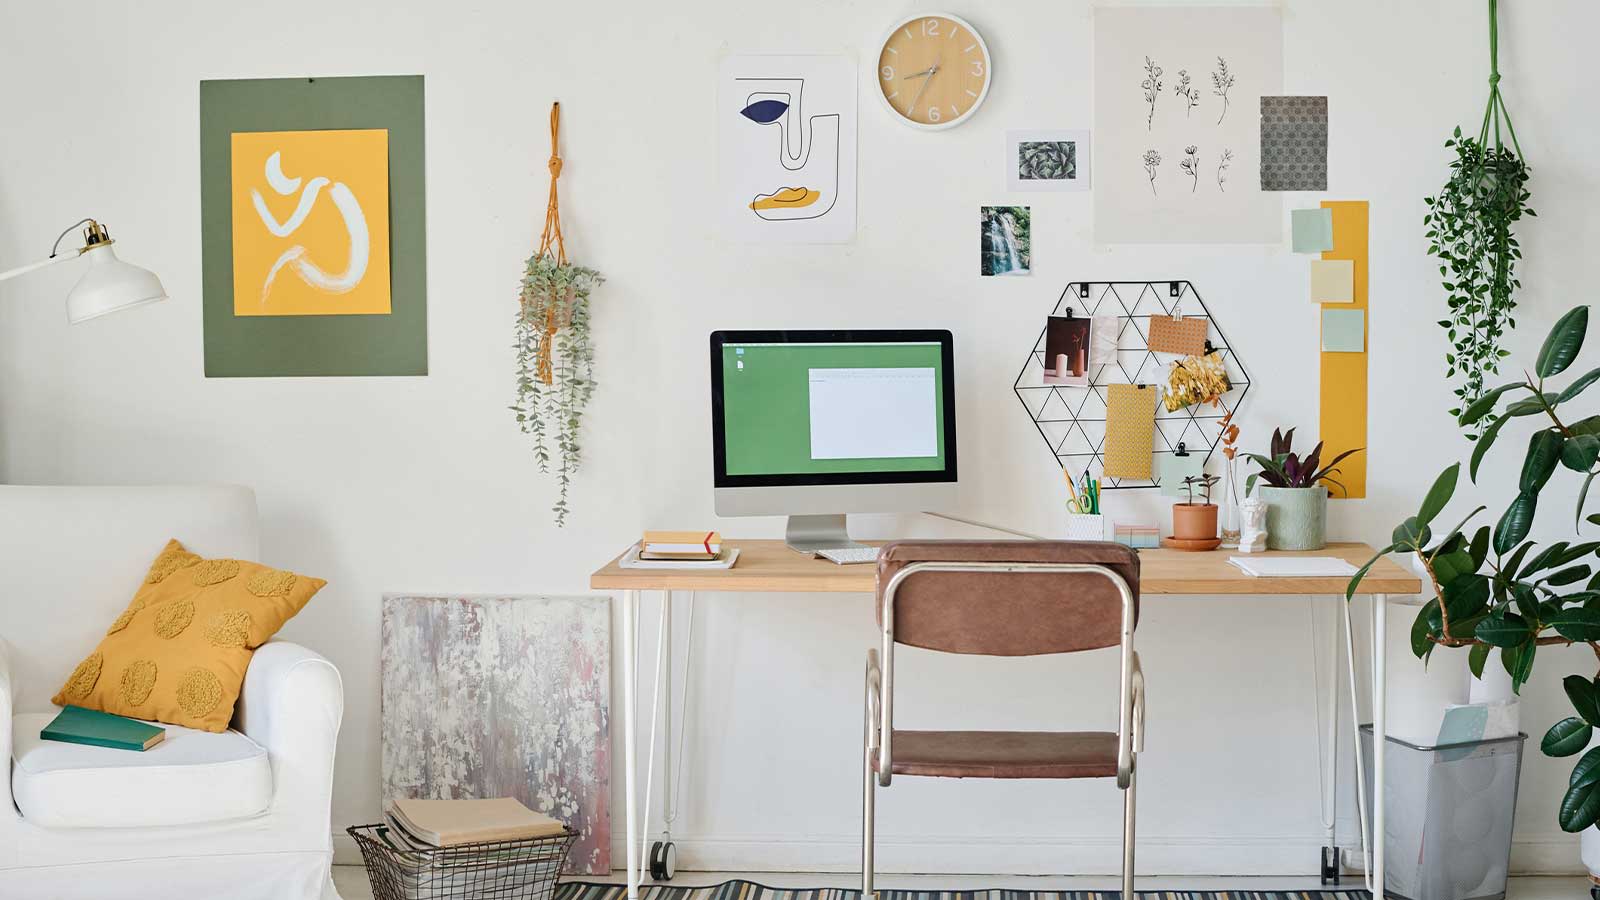 15 desk accessories that make working from home easier